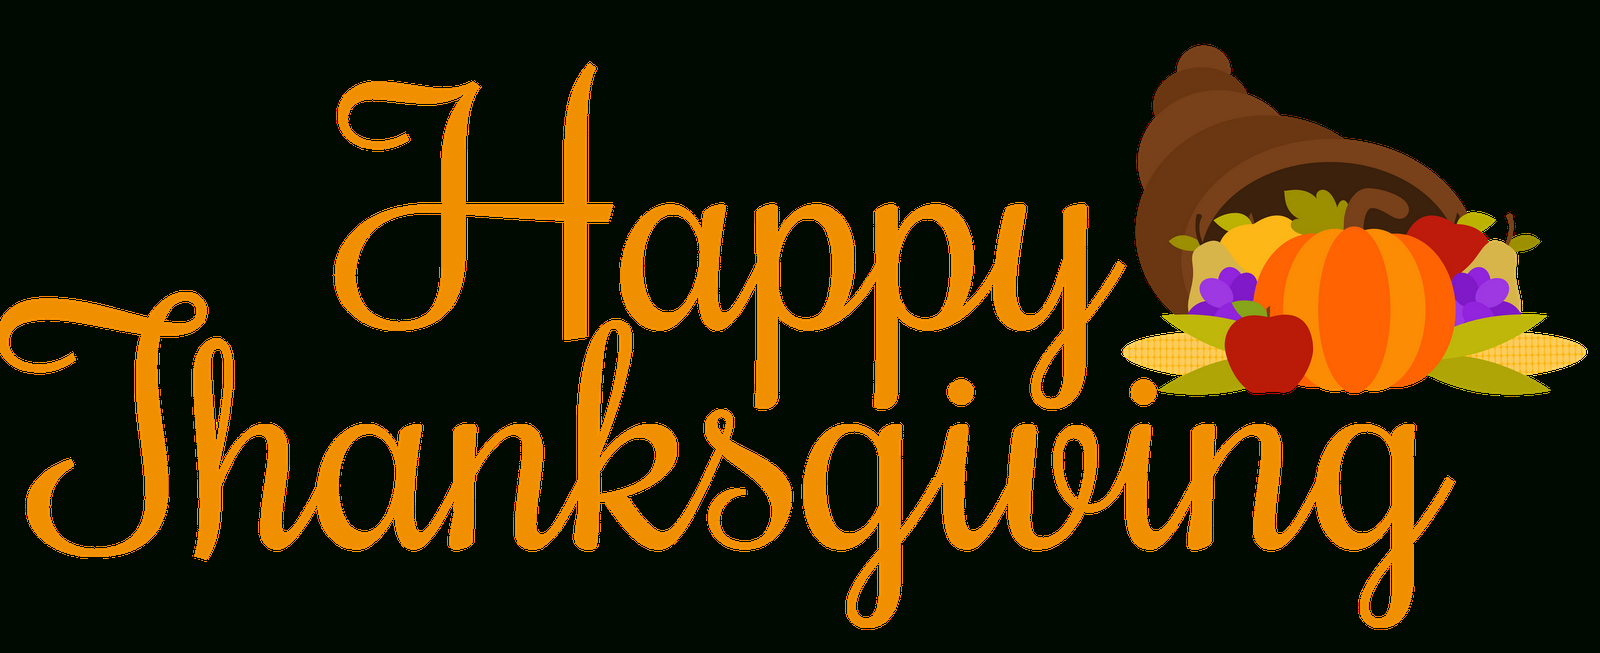 55+ Funny* Happy Thanksgiving Pictures For Facebook Covers Free - Free Printable Happy Thanksgiving Banner